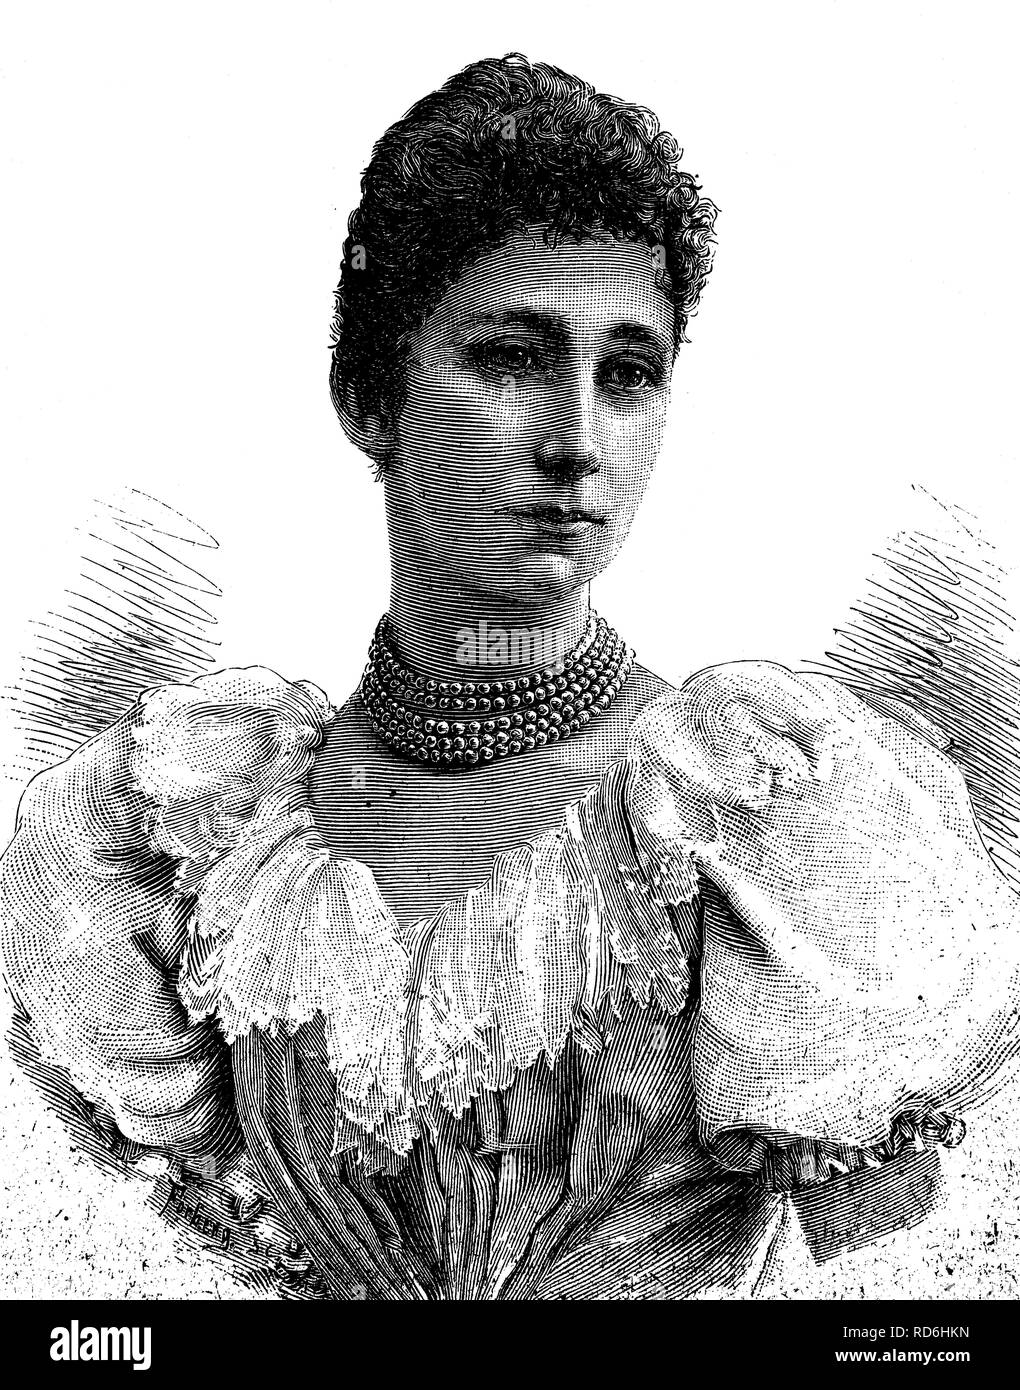 Louise Marie Thérèse d'Artois, 1819 - 1864, Regent of the Duchy of Parma, Piacenza and Guastella, historical illustration Stock Photo